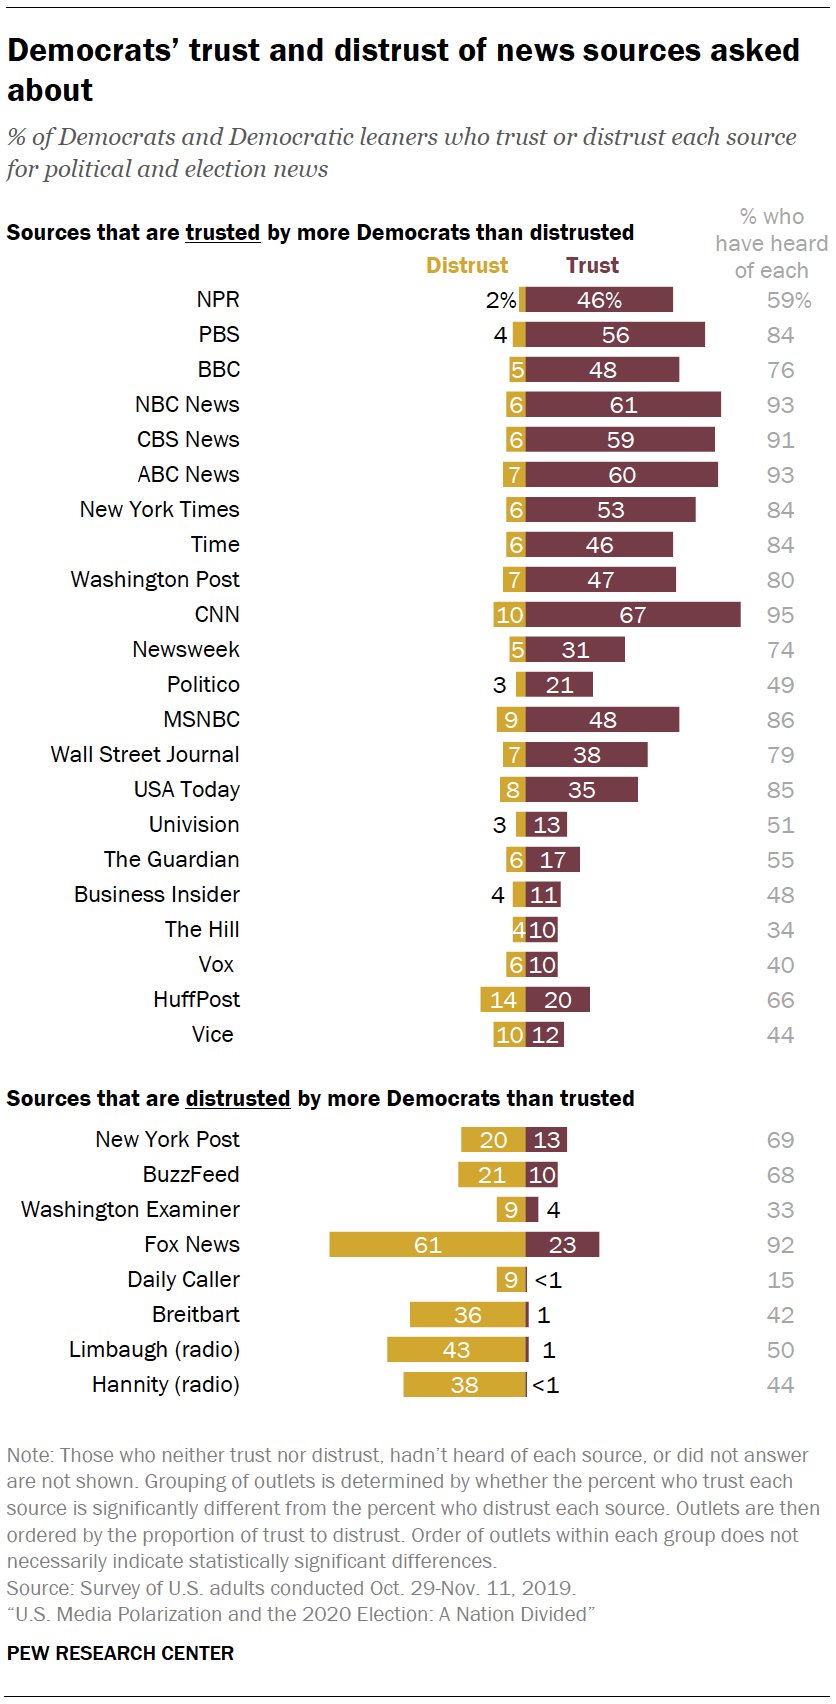 Democrats' trust and distrust of news sources asked about 